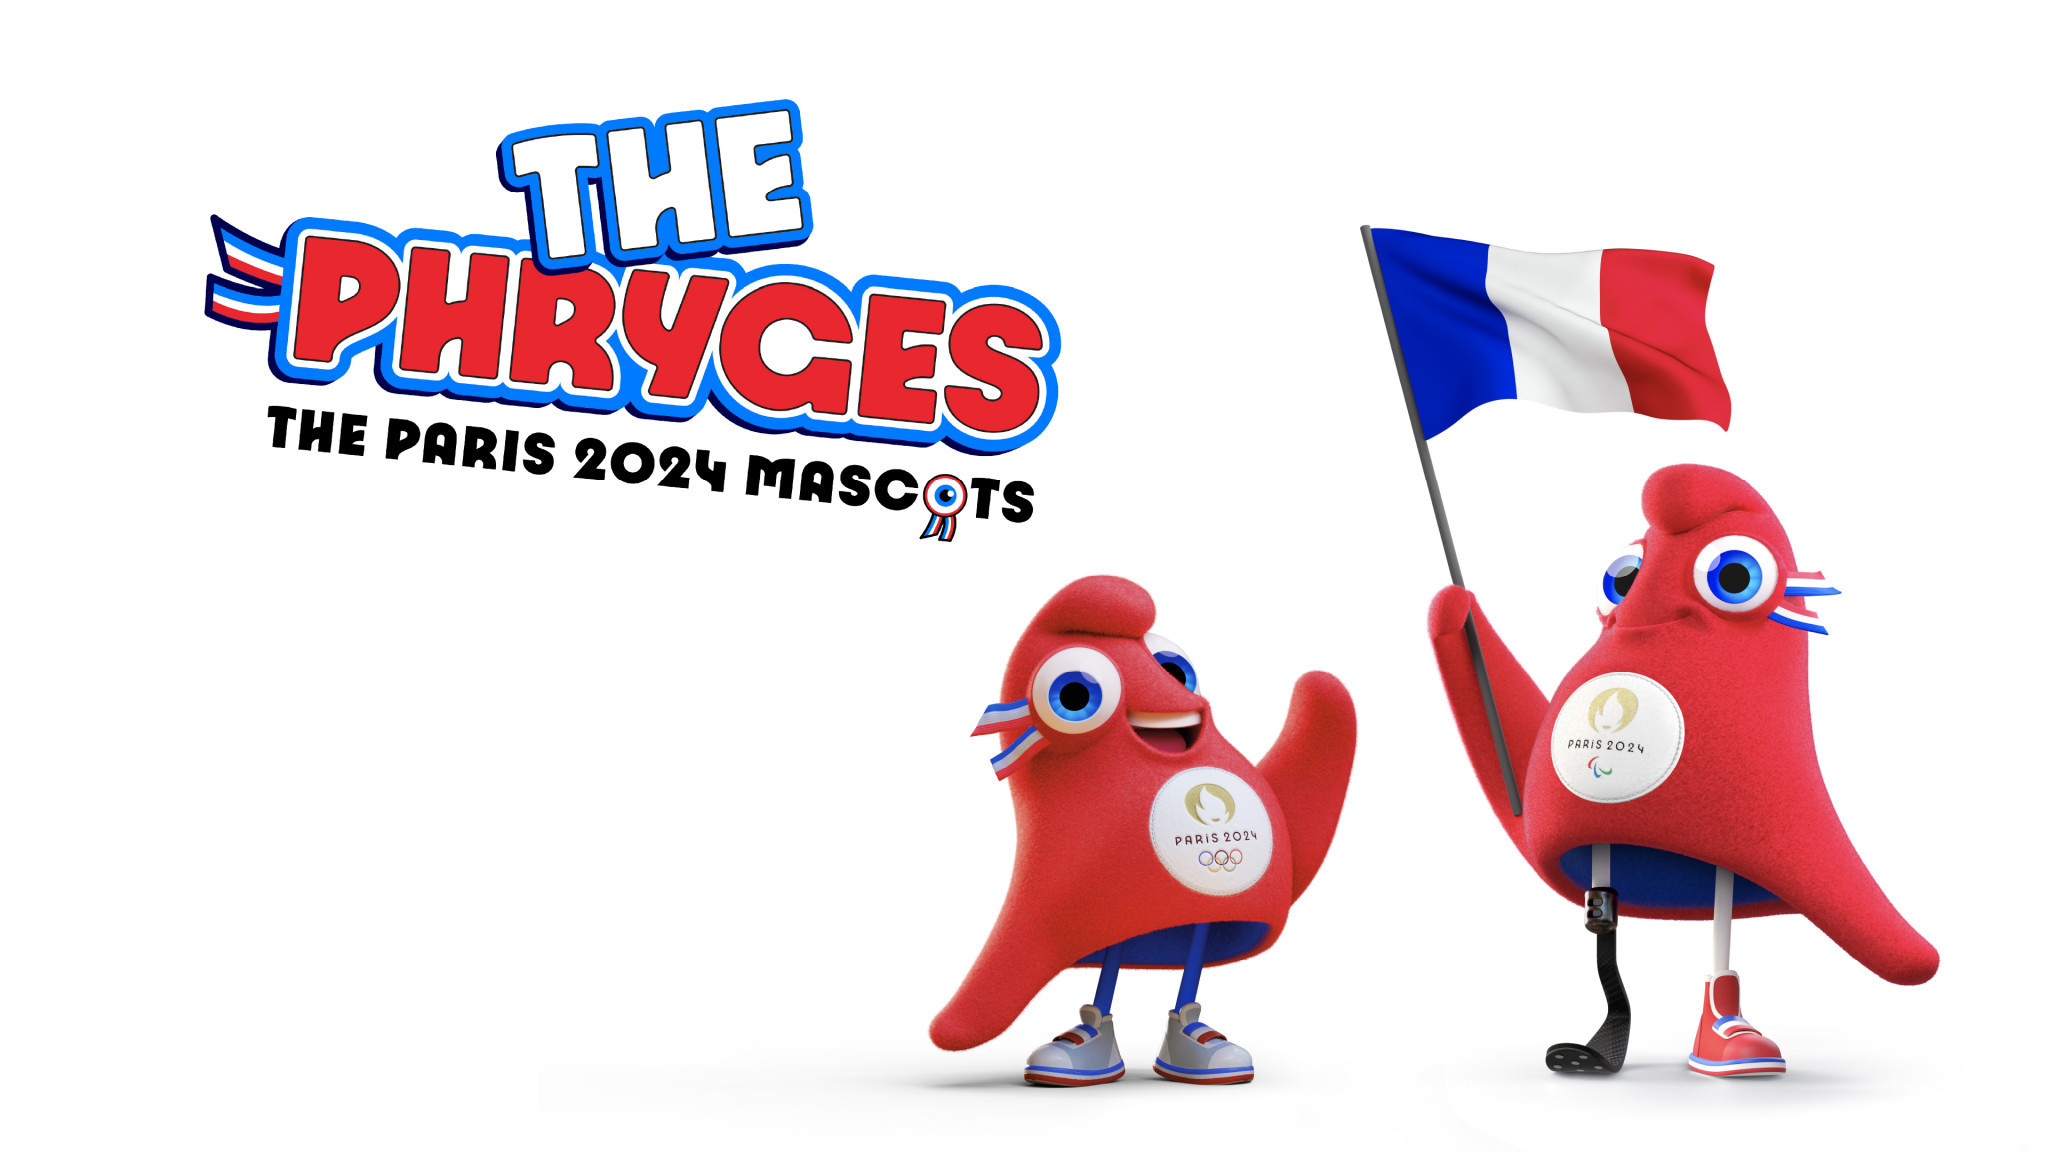 These Phryges, the newly-revealed Paris 2024 mascots, may look light-hearted, but don't be fooled - these little guys are deep ©Paris 2024